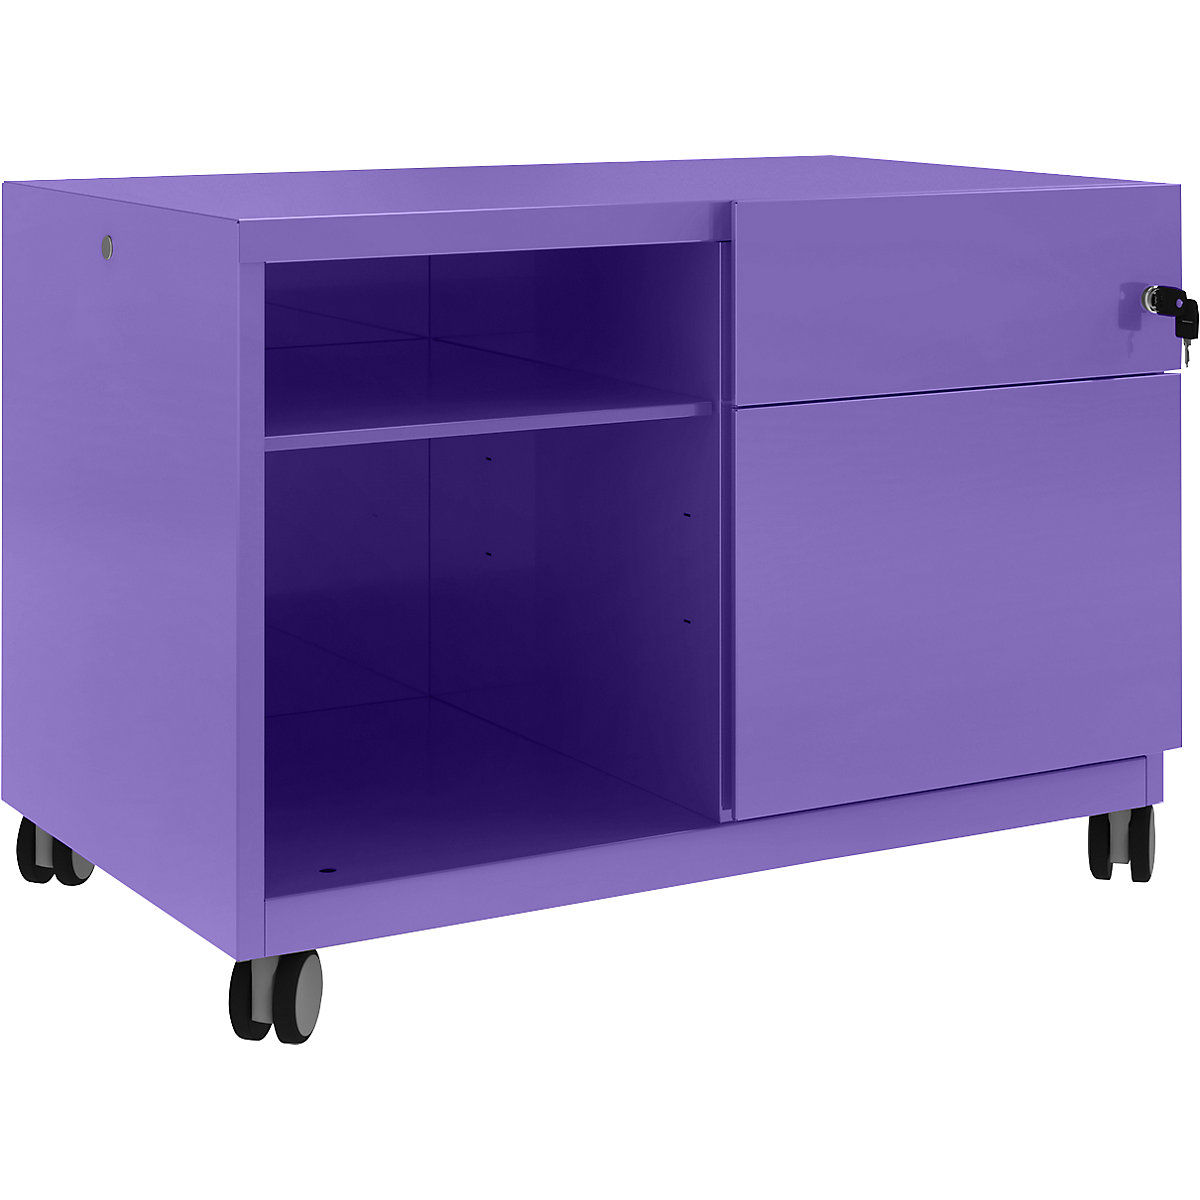 Note™ CADDY, HxBxT 563 x 800 x 490 mm – BISLEY, 1 universal drawer and suspension file drawer on the right, parma-30